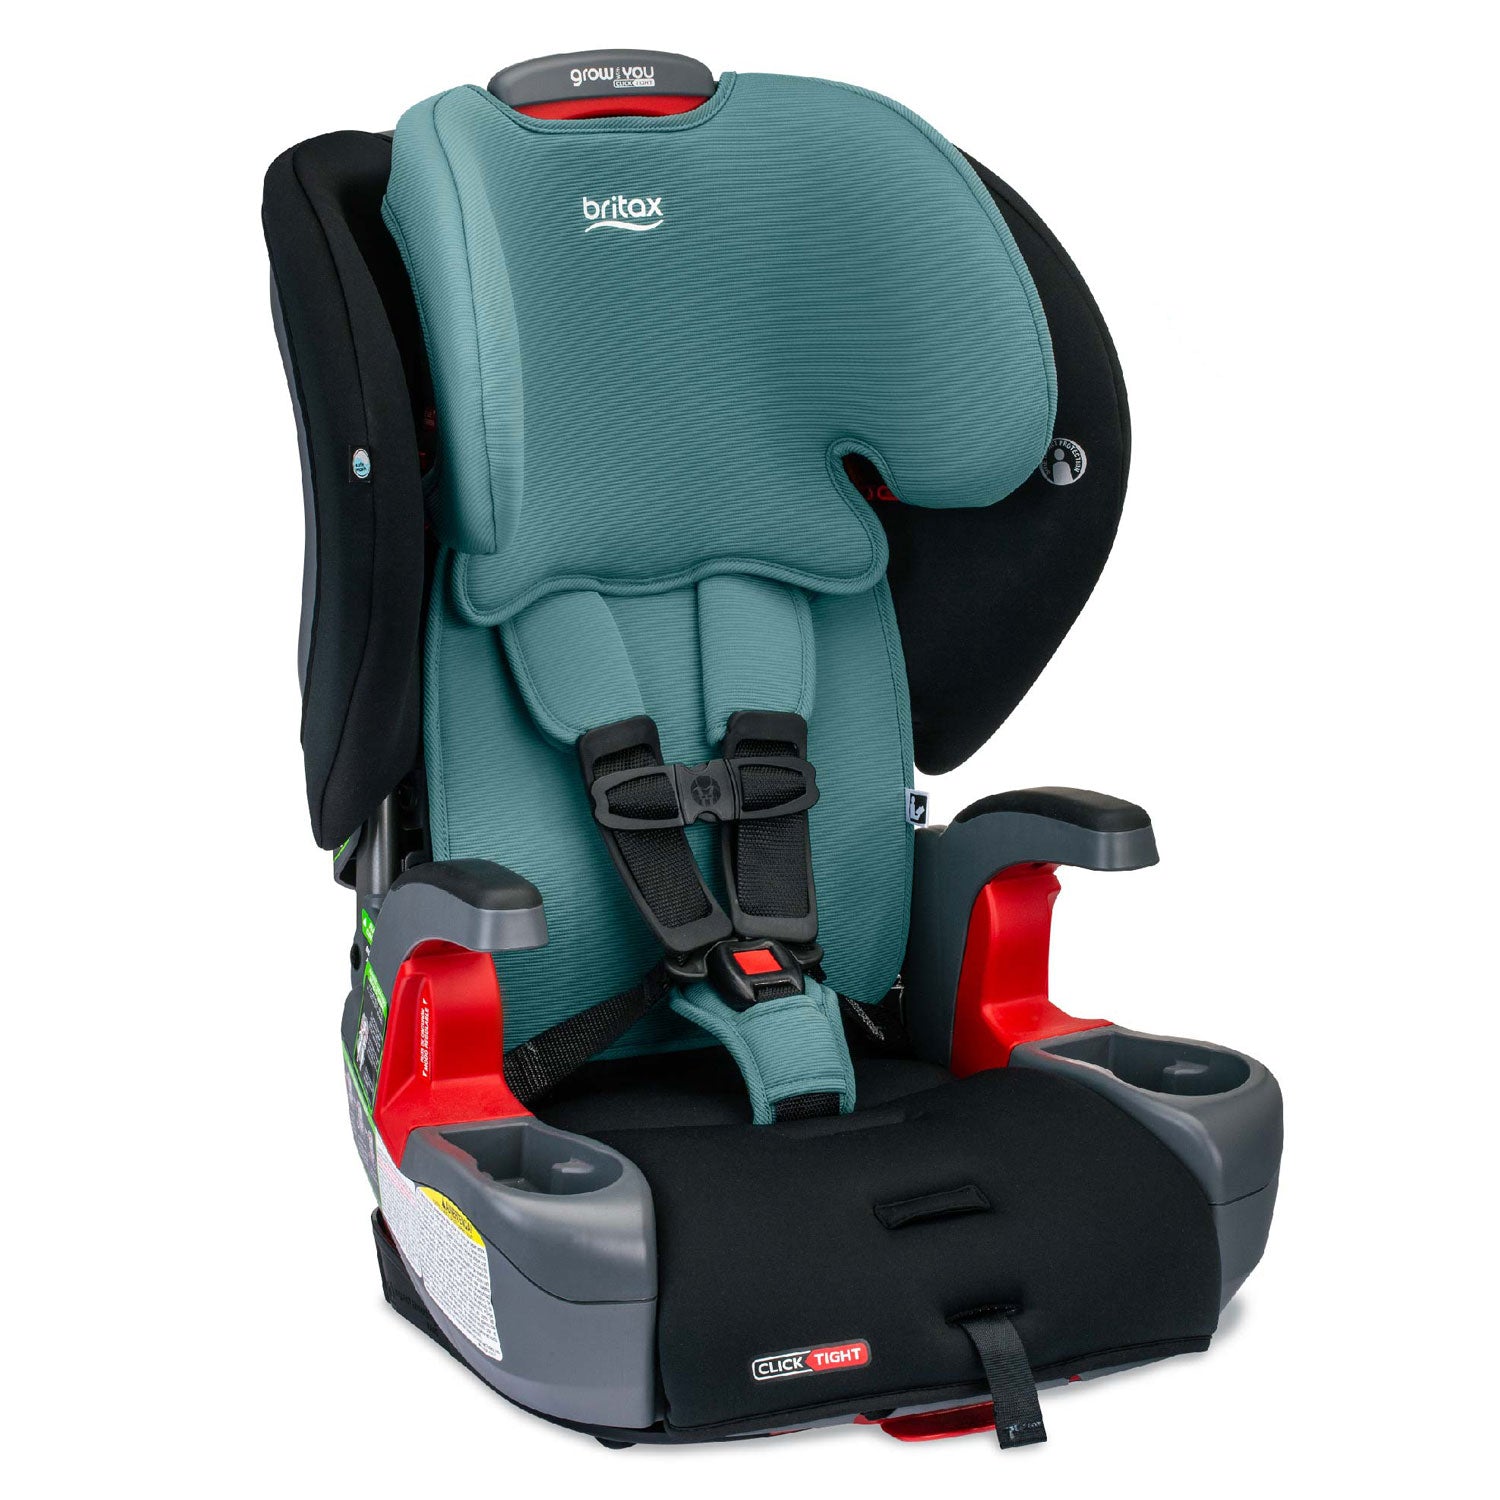 Britax Grow With You ClickTight Harness-2-Booster Seat - Green Contour Safewash